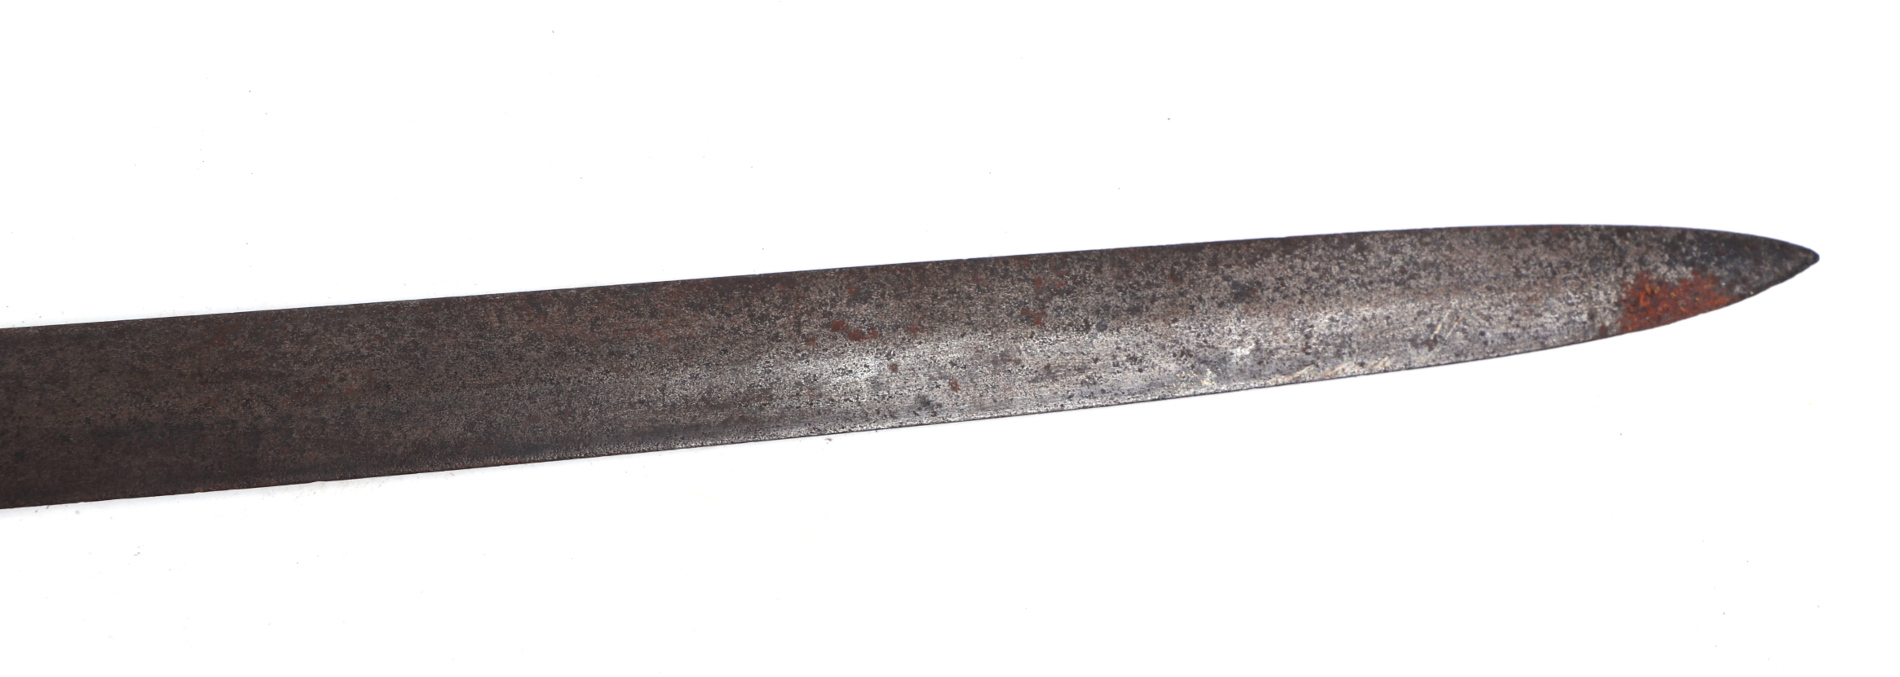 A British Officer's sword with wirebound shagreen grip, pieced and engraved basket hilt and 89cms - Image 7 of 12